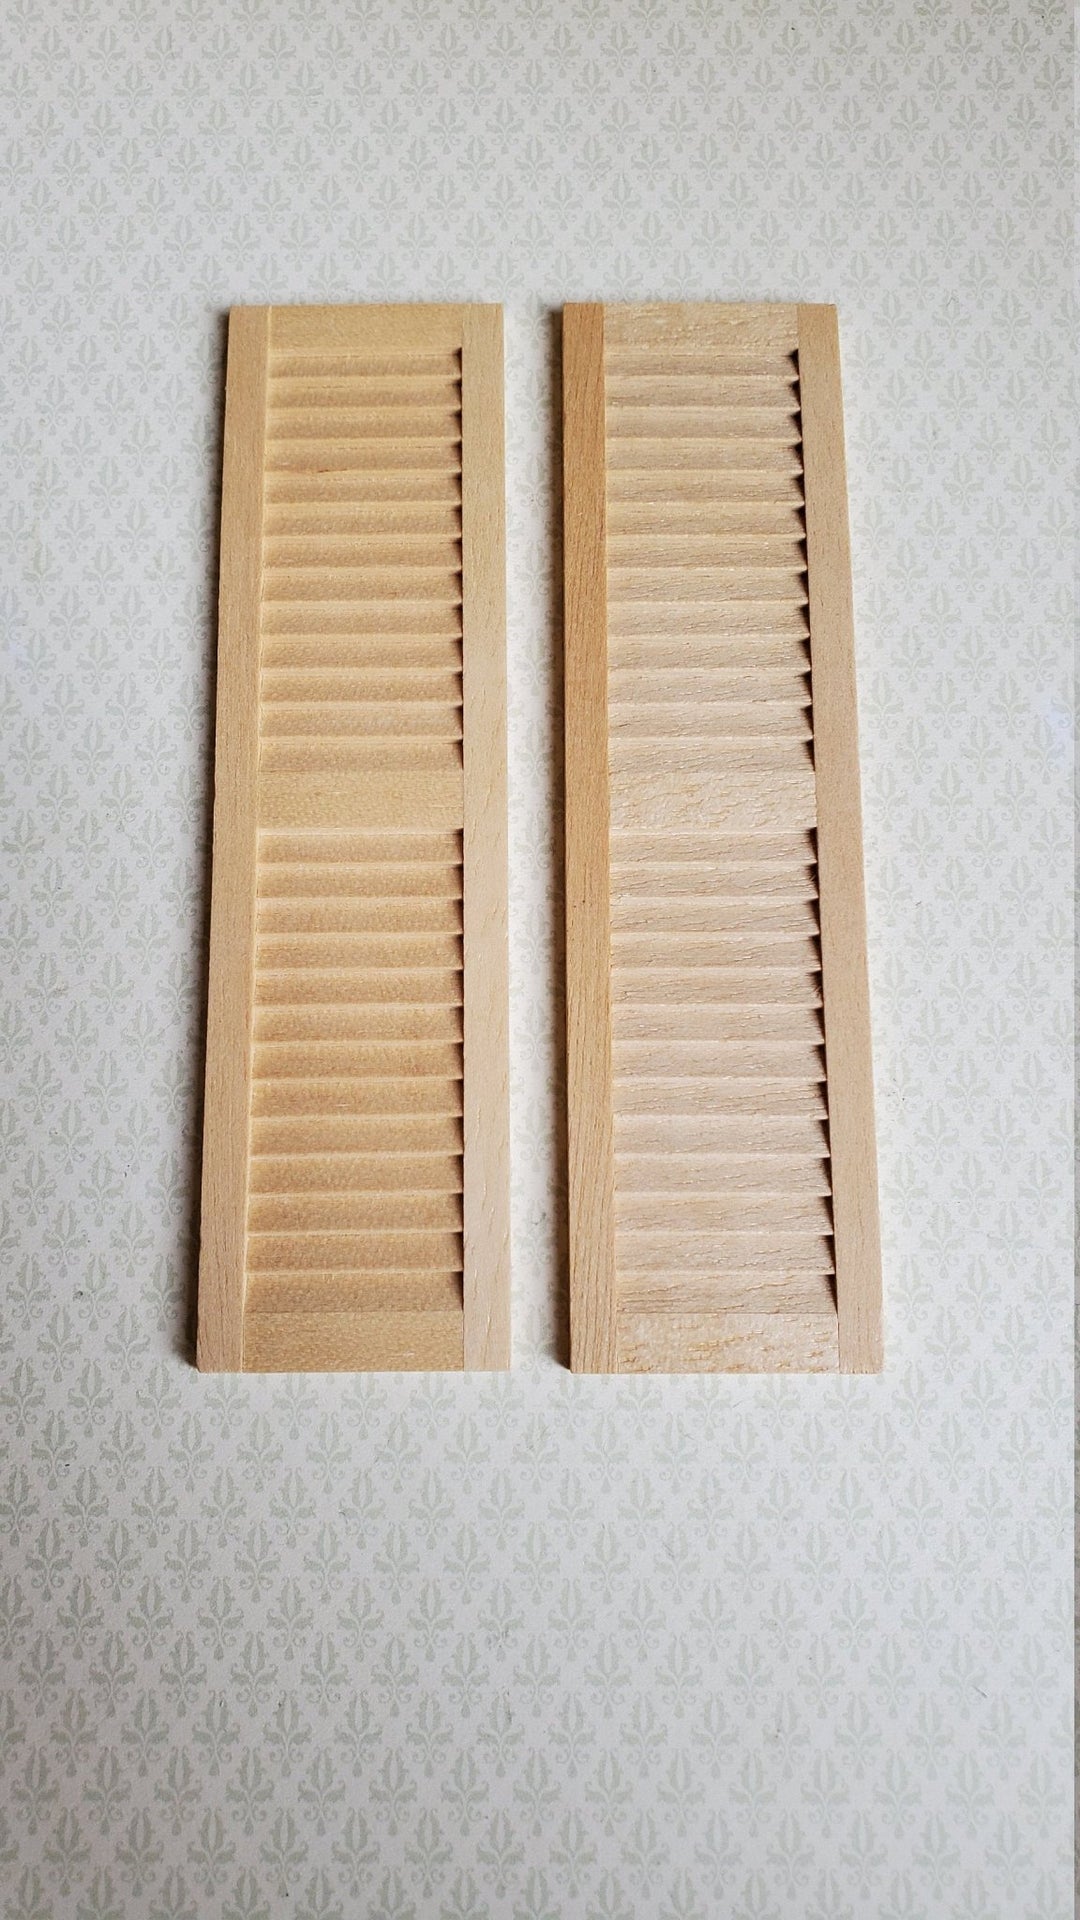 Dollhouse Miniature Shutters Louvered 1 Pair Unfinished Wood 1:12 Scale 4 11/16" HW5025 - Miniature Crush